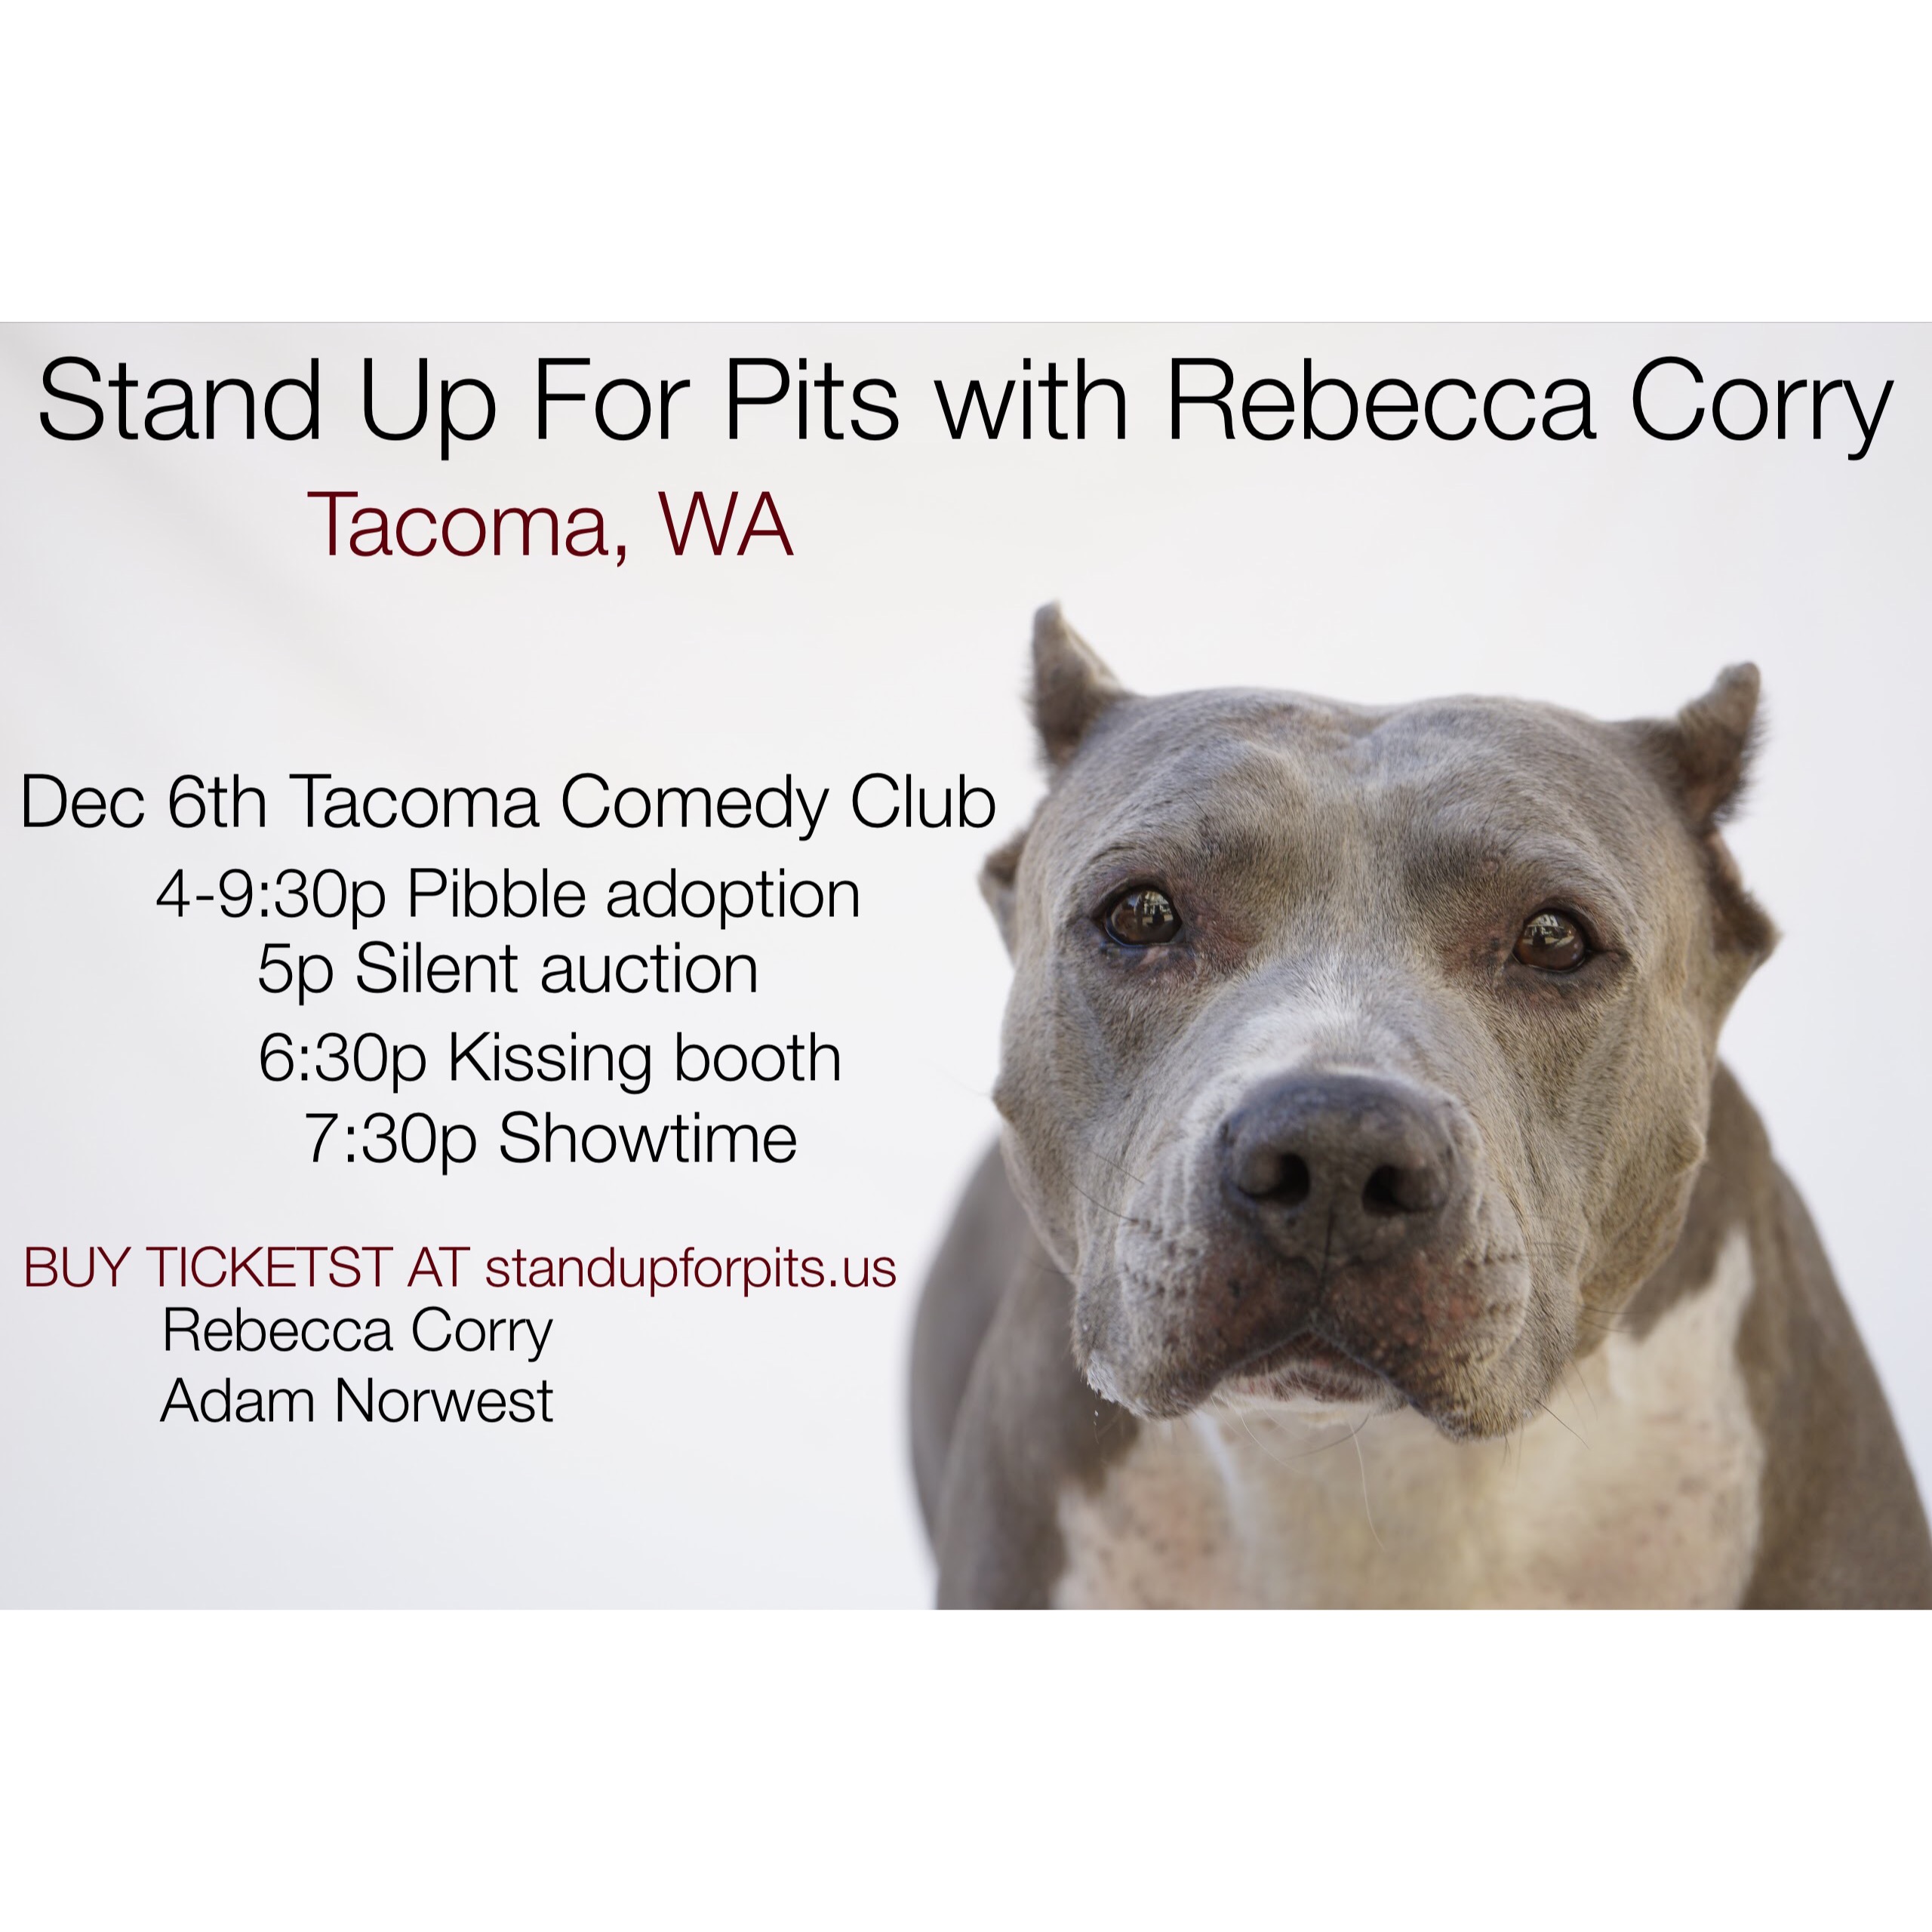 Tickets for Stand Up For Pits Tacoma WA going fast!